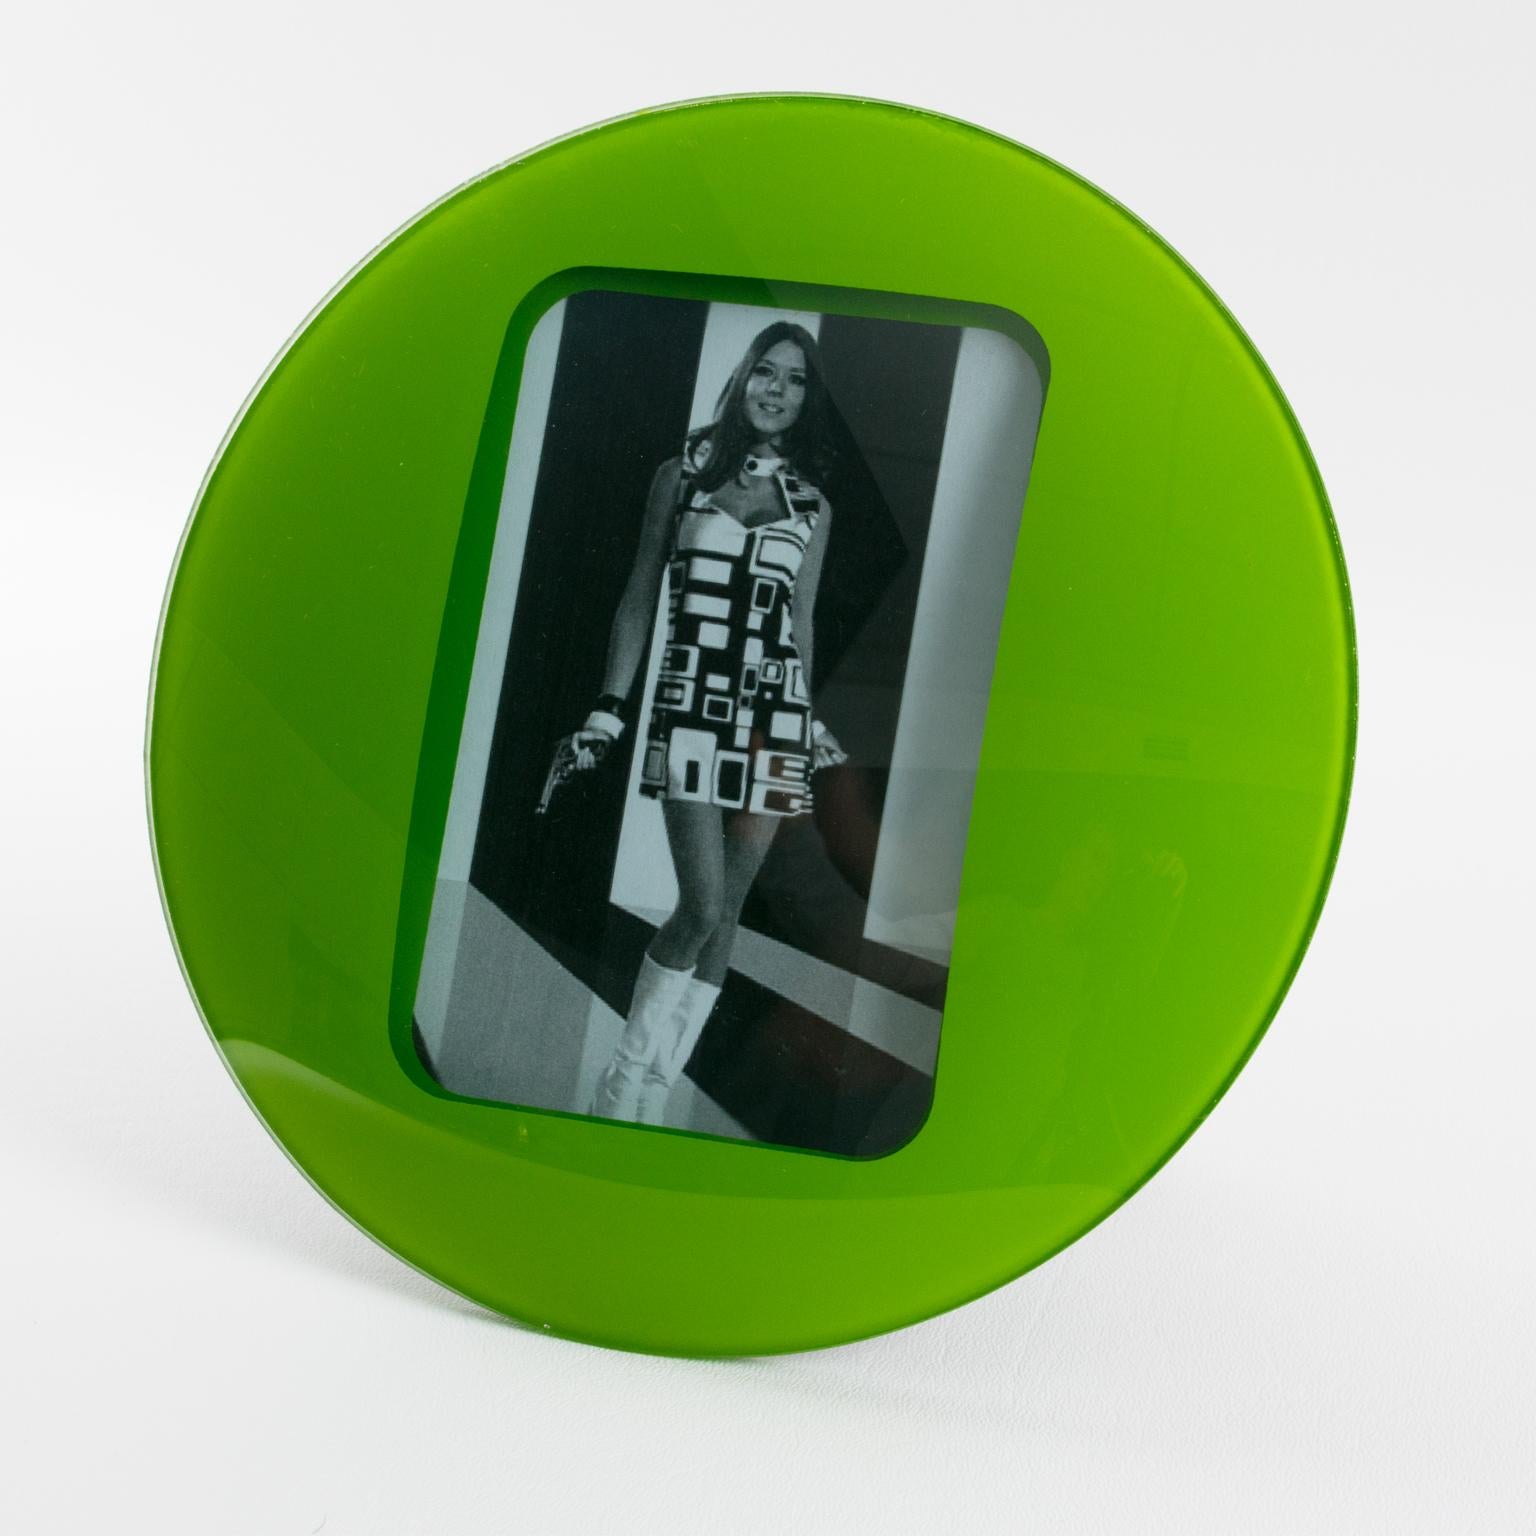 Stylish 1960s Space Age green glass picture photo frame. Round domed design with kinetic effect. Easel and back covered with black paper. The picture photo frame can only be placed in a portrait position. No visible maker's